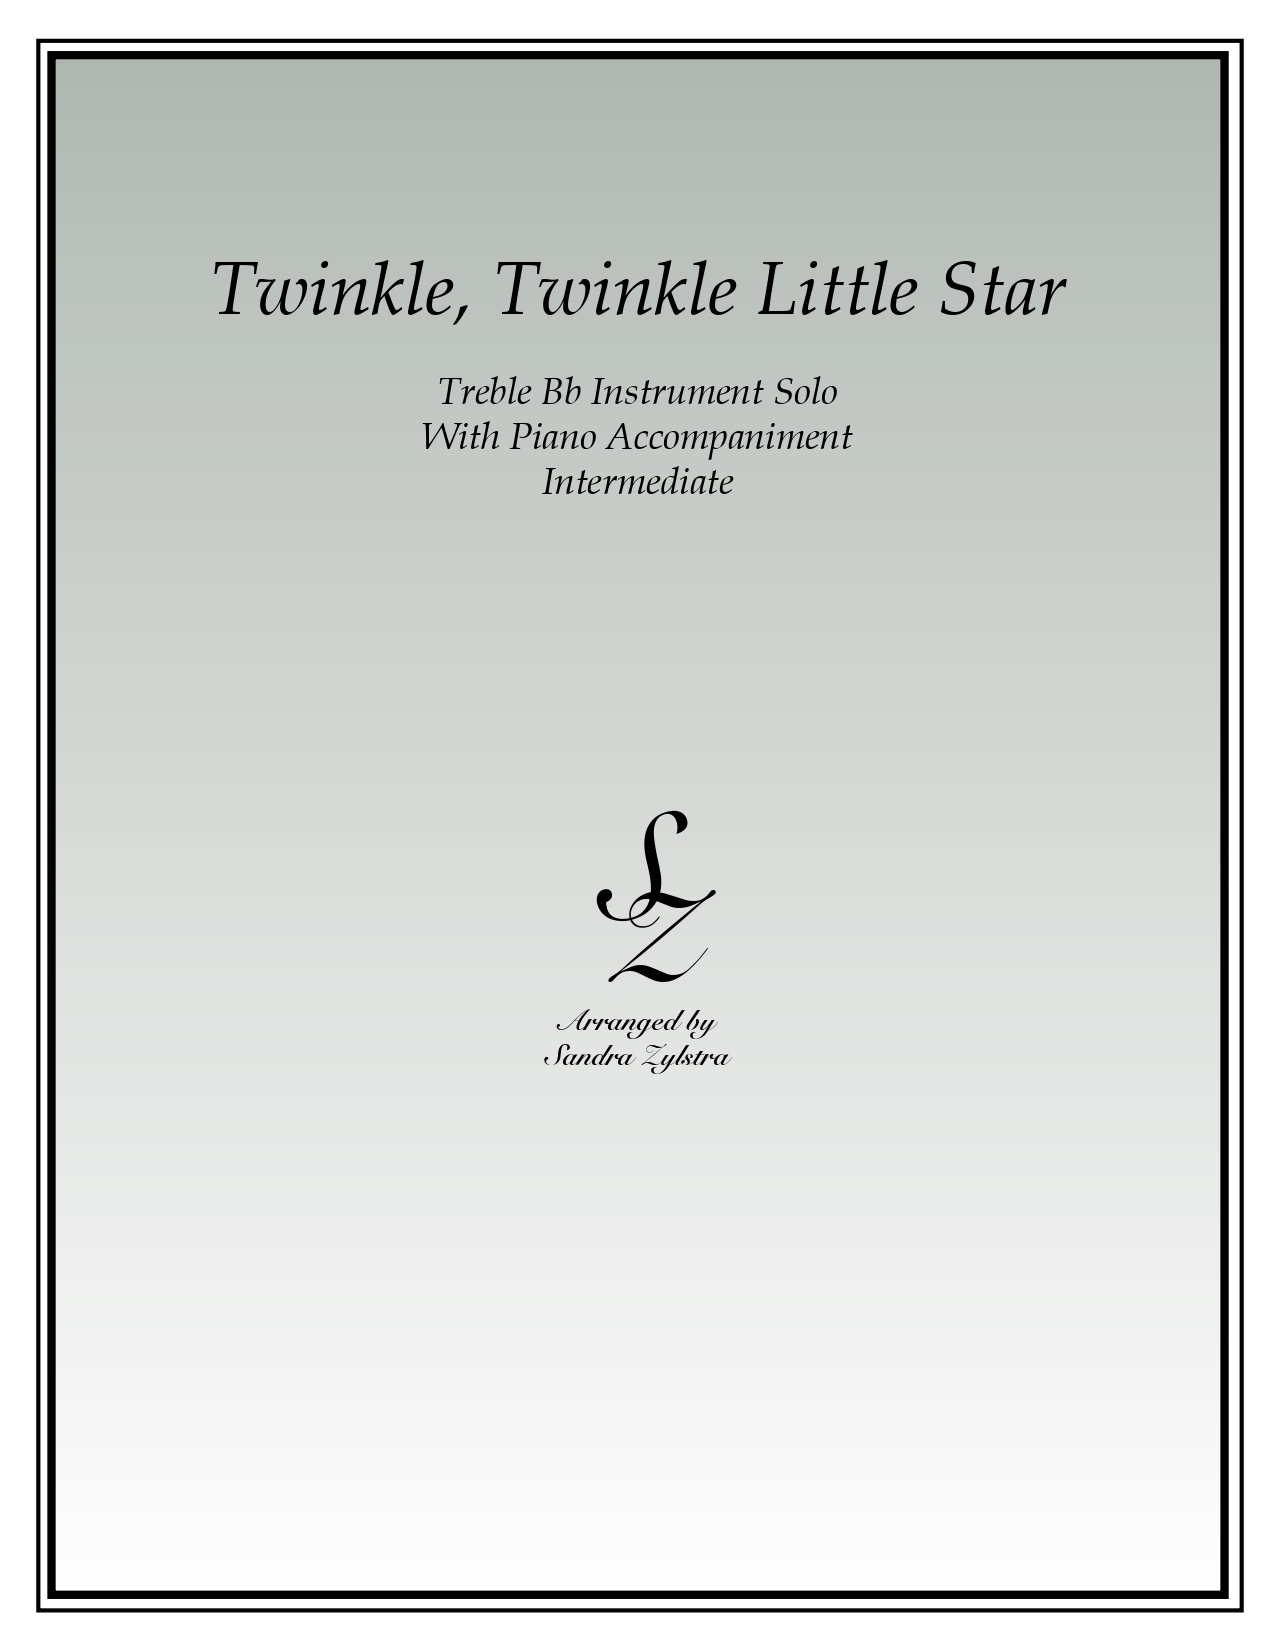 Twinkle Twinkle Little Star Bb instrument solo part cover page 00011